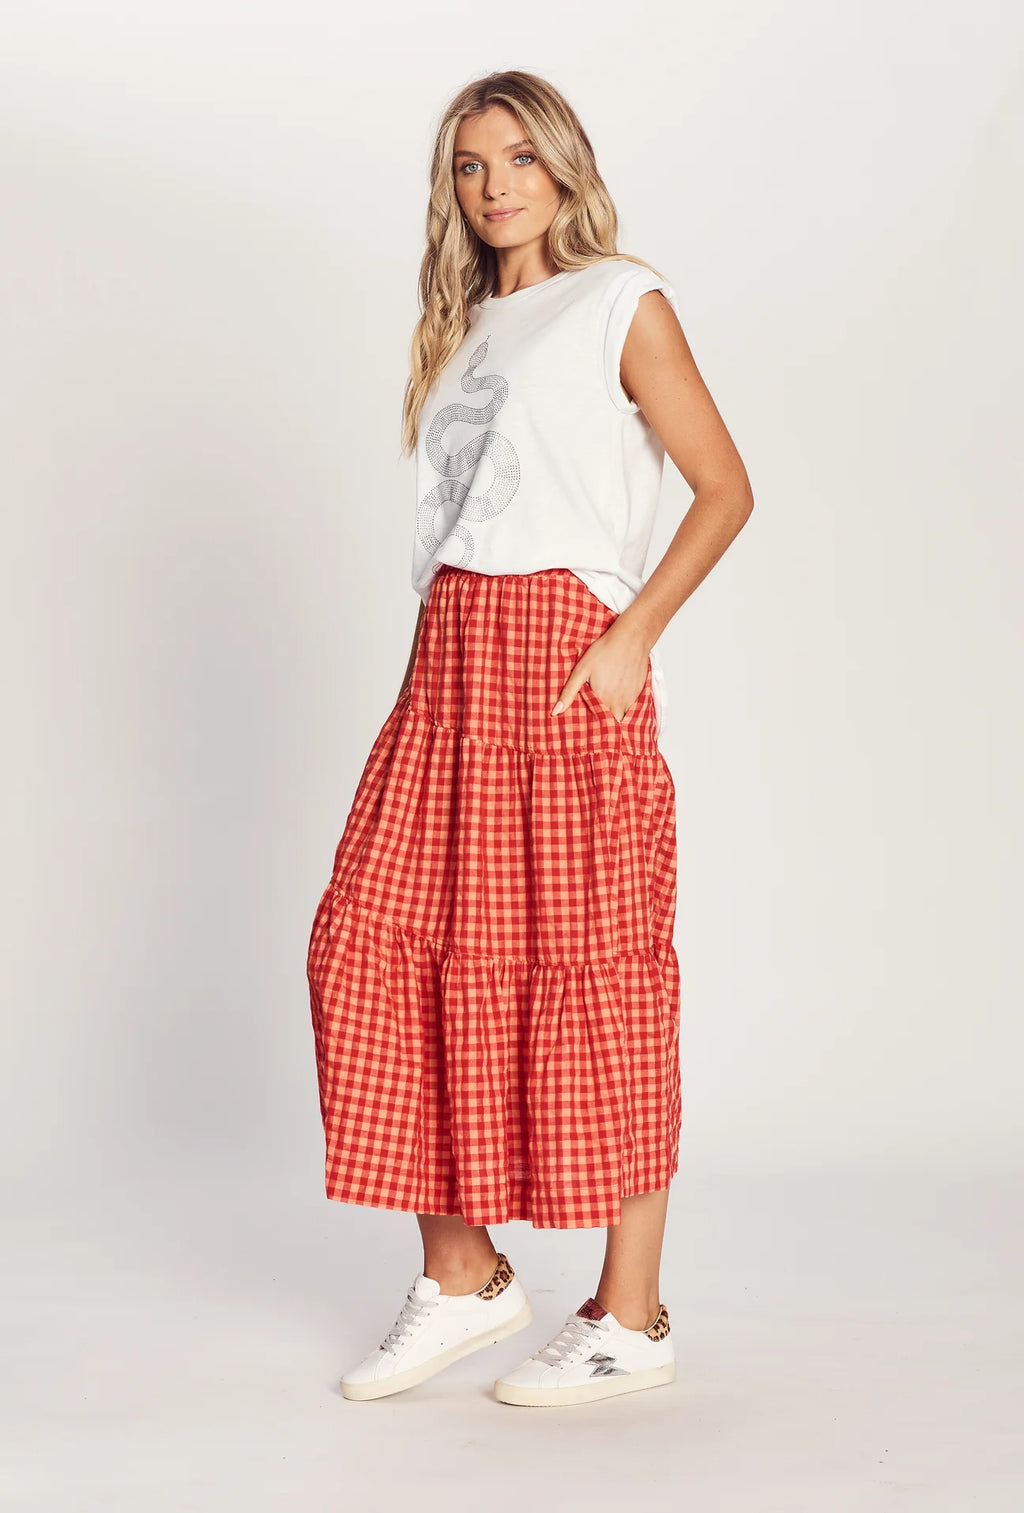 We are the others - The Gingham Skirt